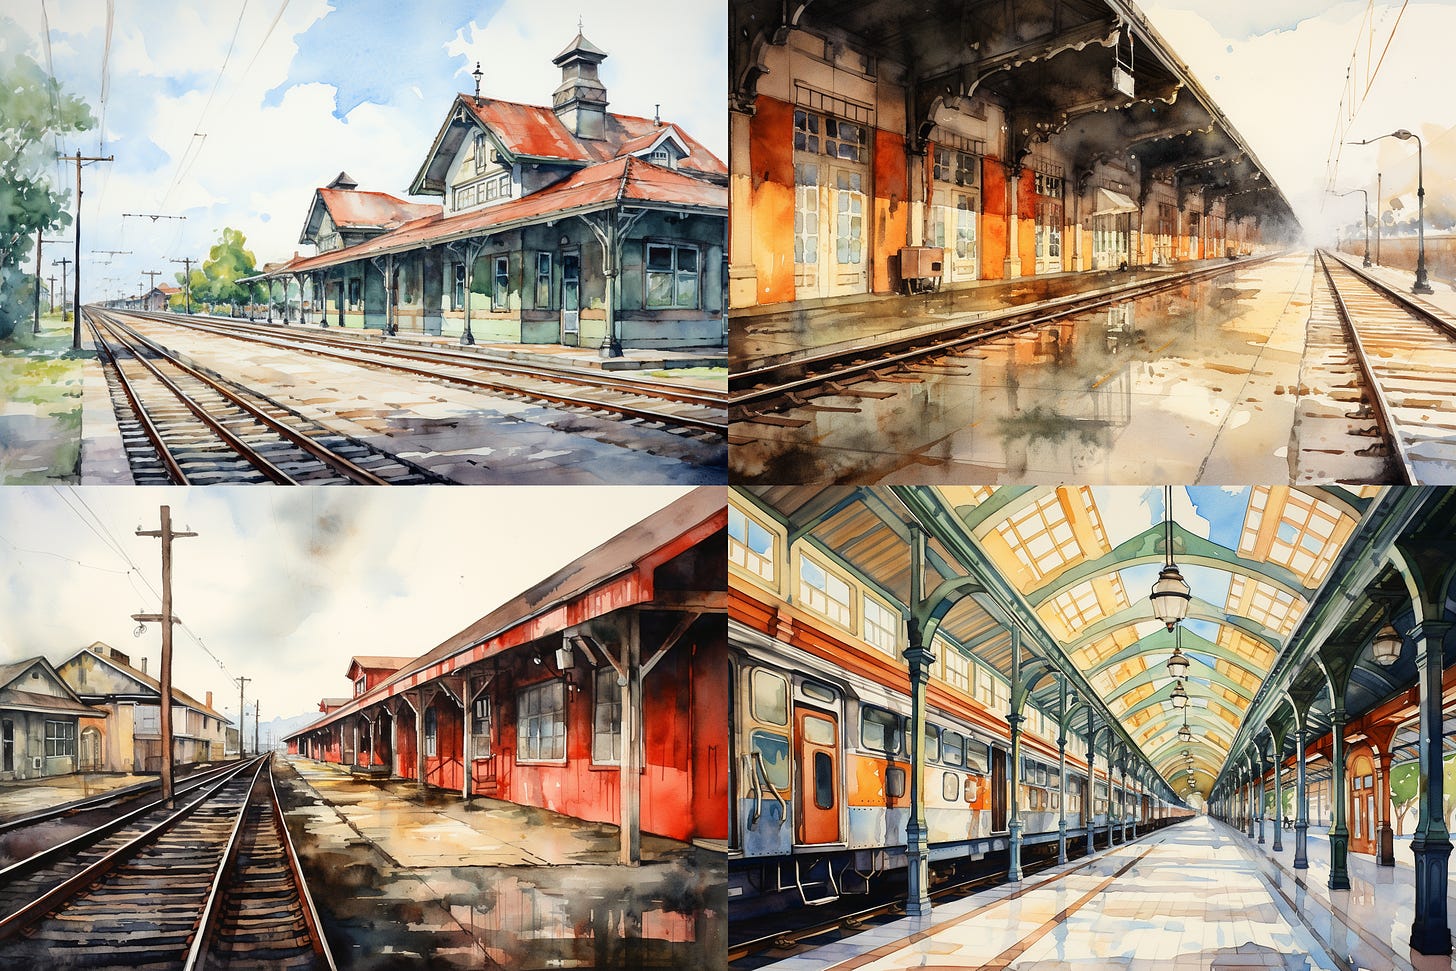 Four-image Midjourney grid of watercolor paintings of train stations without people, clocks, or flowers